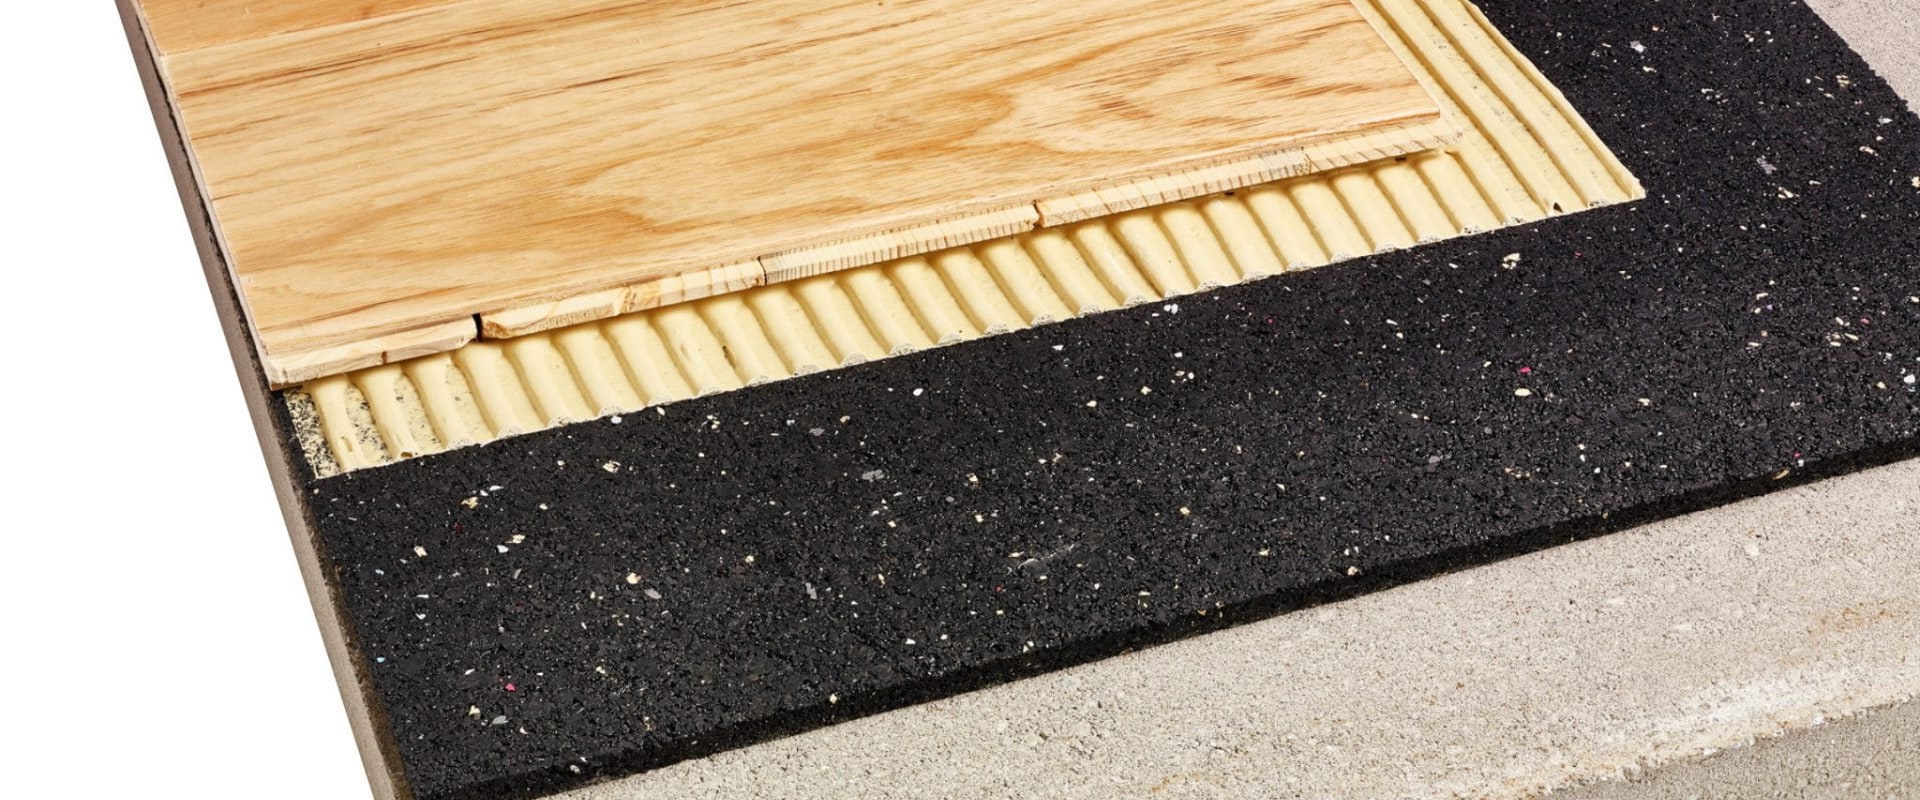 How Thick Should Acoustic Underlay Be for Maximum Noise Reduction?